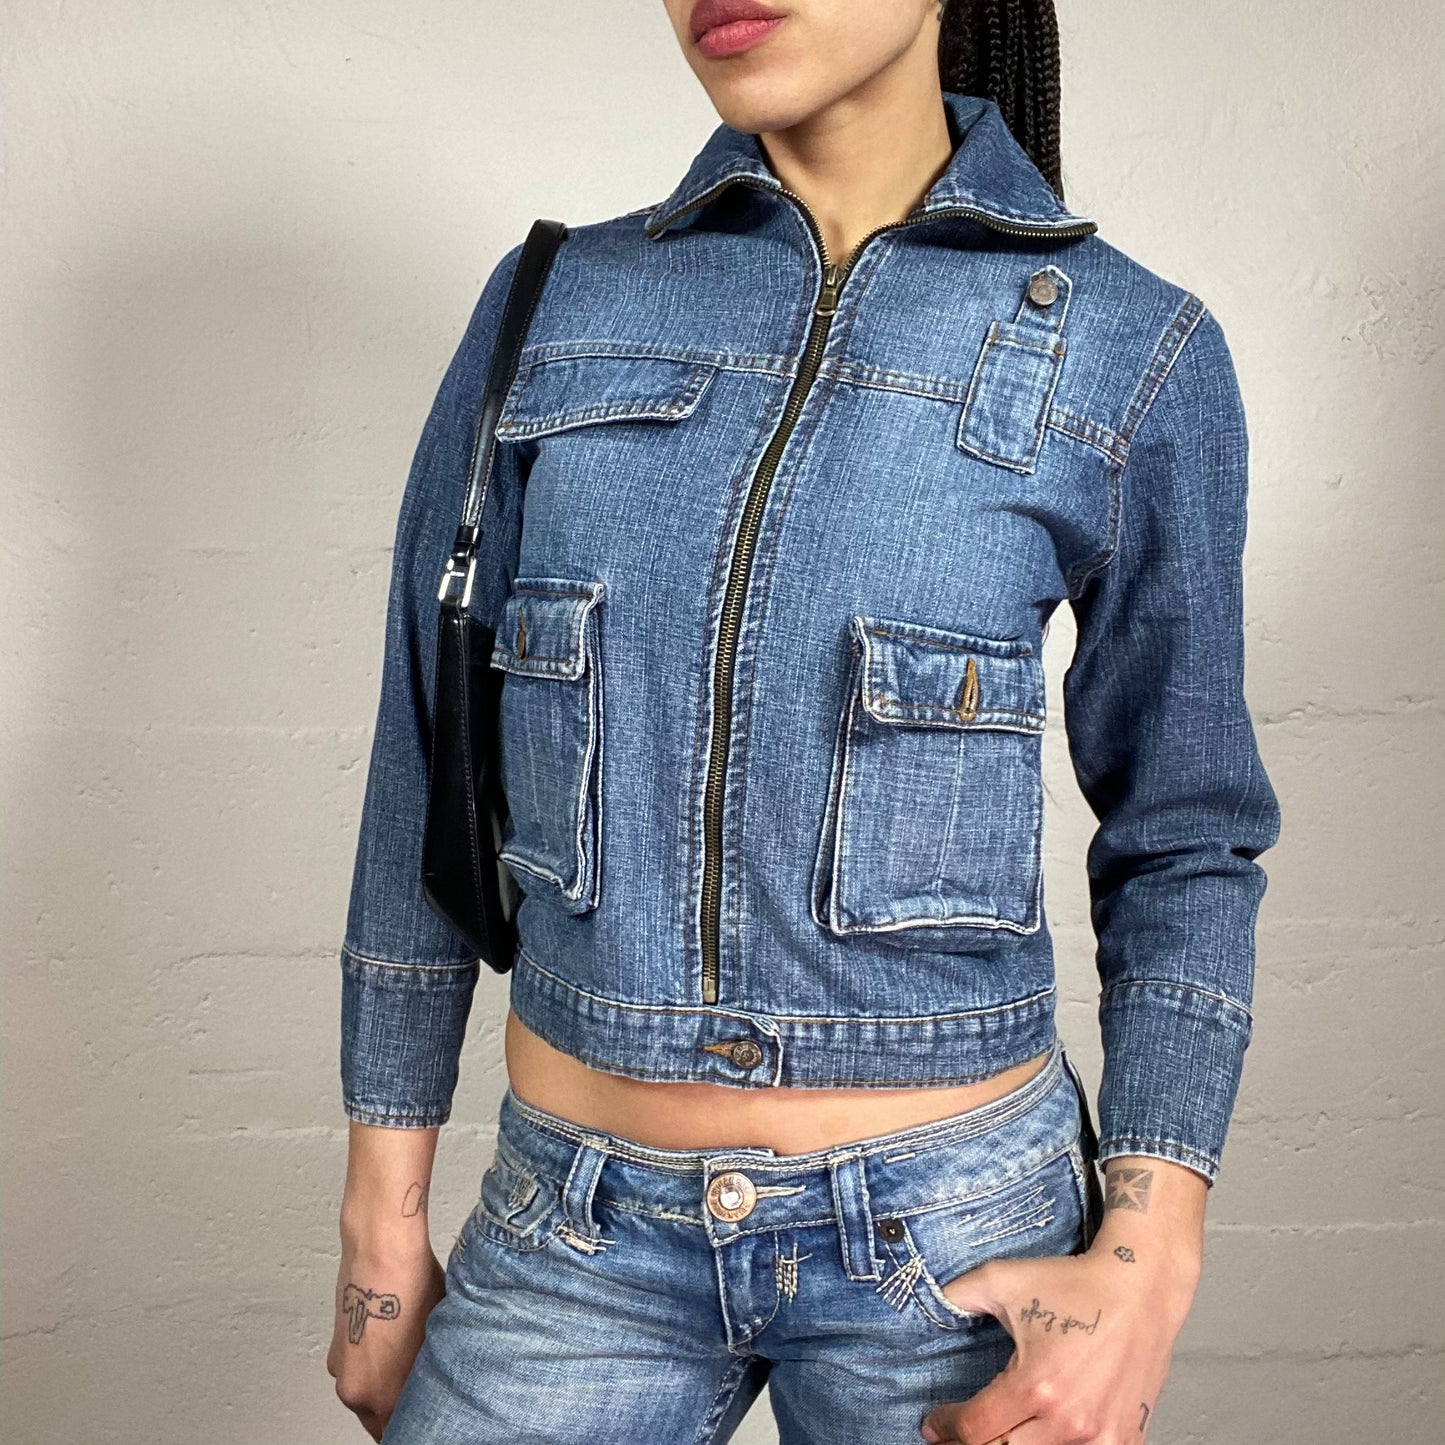 Vintage 2000’s Downtown Girl Classic Blue Zip Up Collared Denim Jacket with Pocket Details (S)